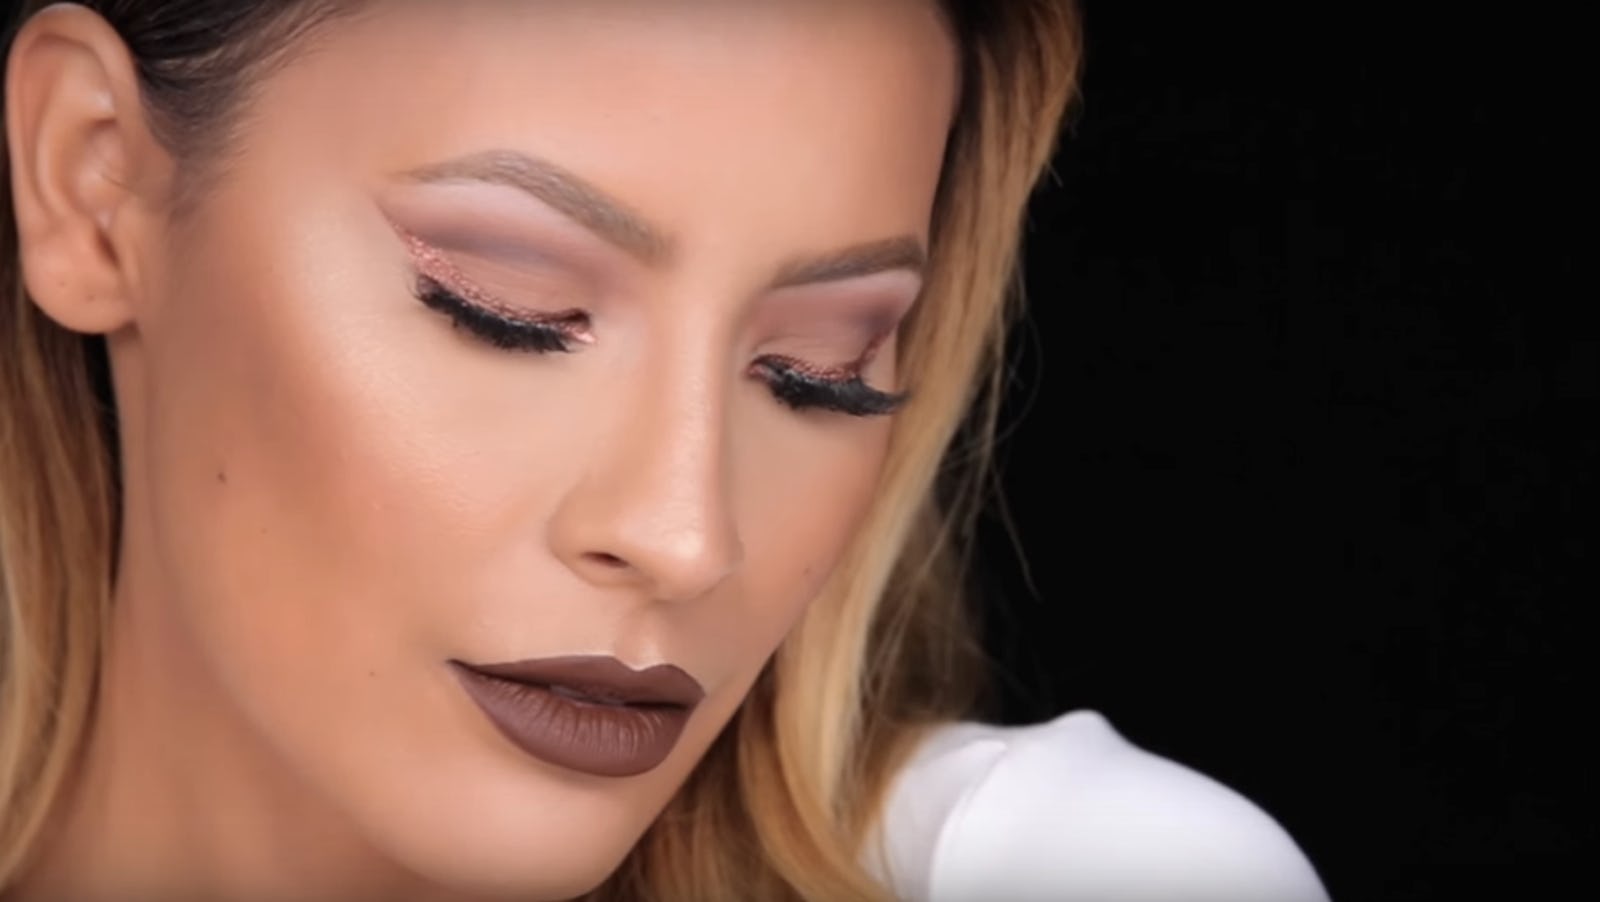 Kylie Jenner Lip Kit Tutorials Show Her Products In Action — Videos 